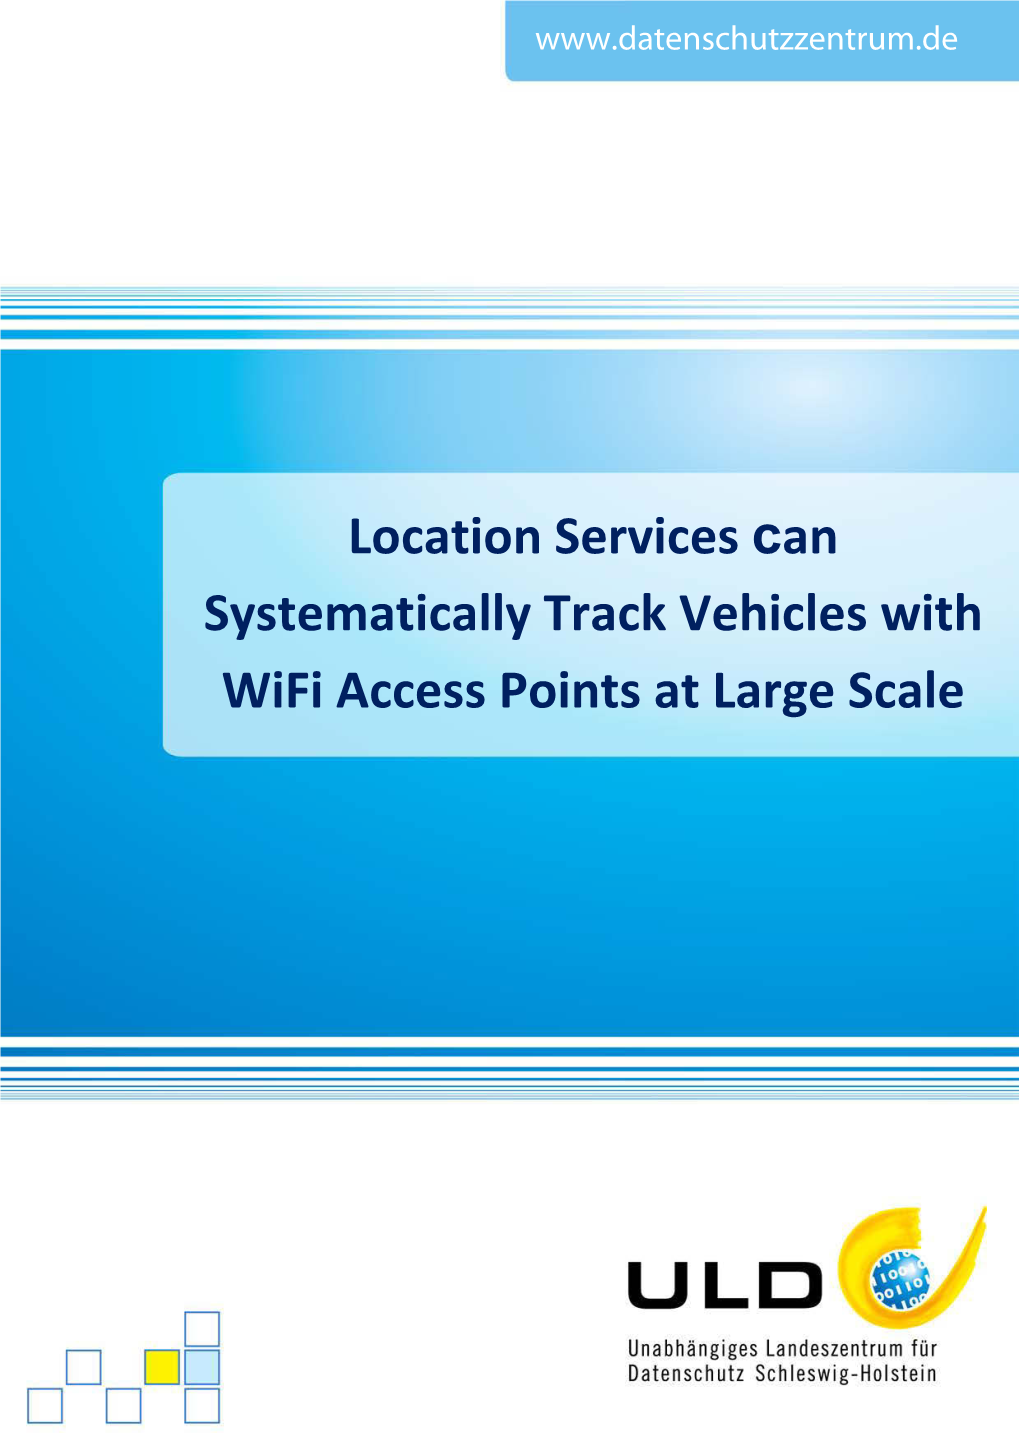 Location Services Can Systematically Track Vehicles with Wifi Access Points at Large Scale